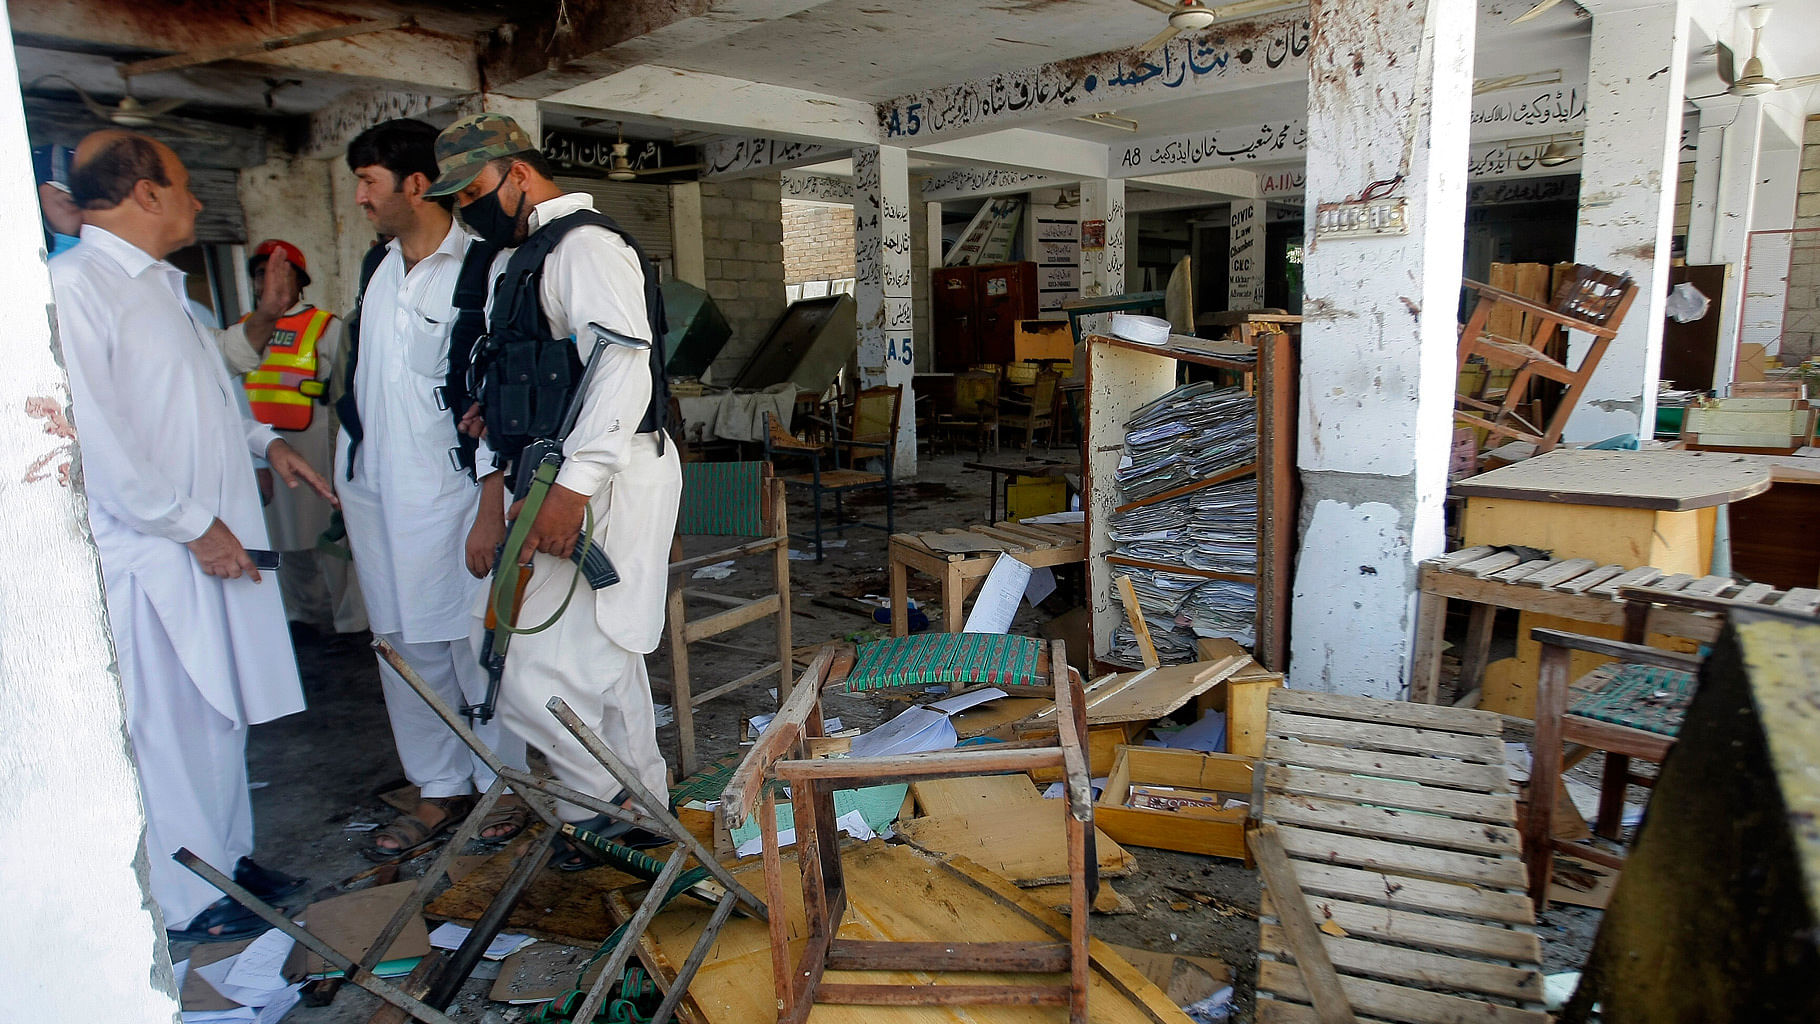 The blasts come hours after four militants attacked Christian Colony in Peshawar. (Photo: AP)